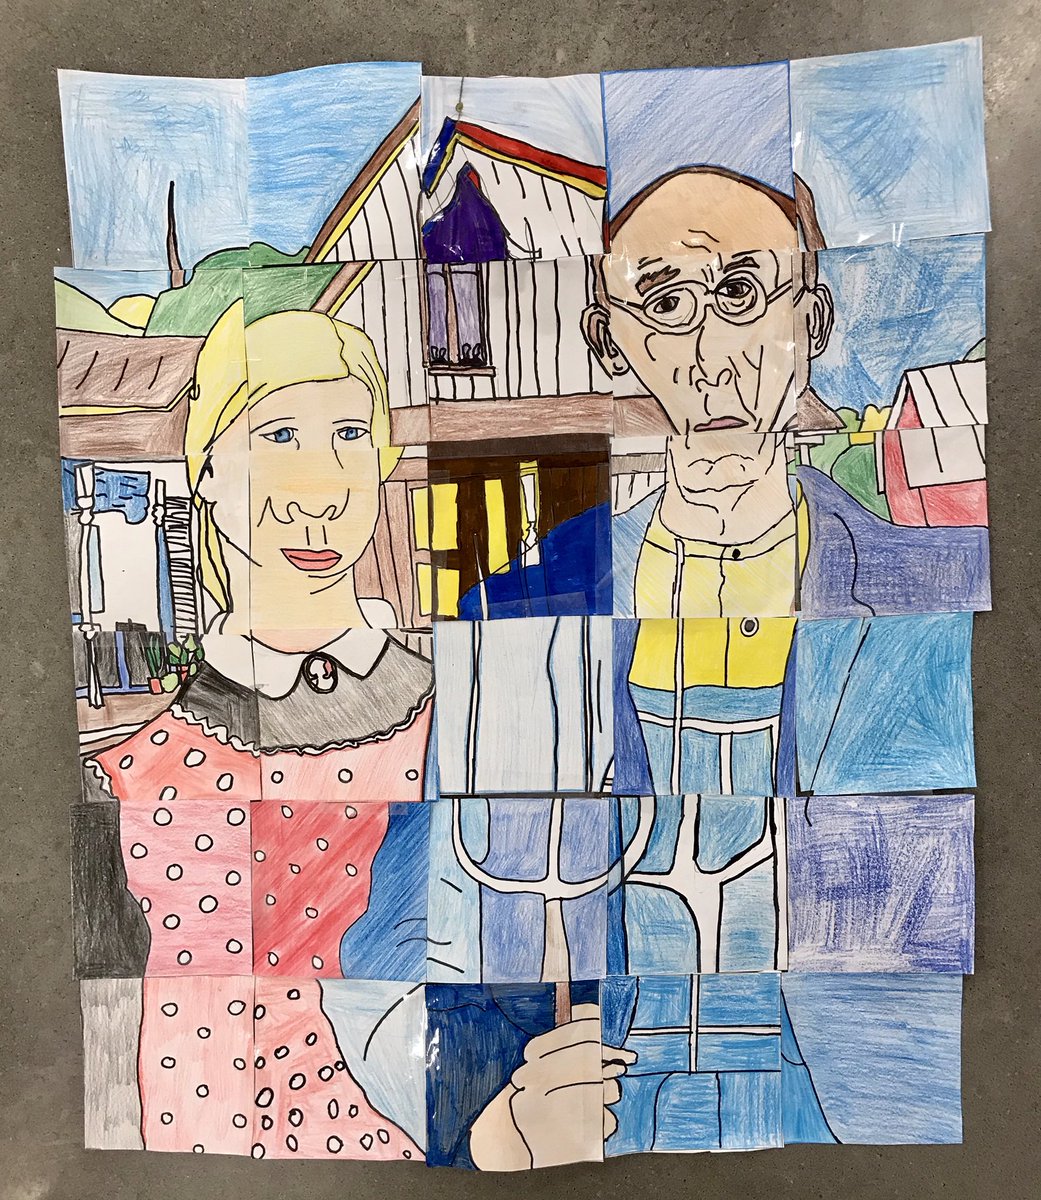 Art Around the World did some studying about American Gothic this week! We talked about parodies and created our own then did a group grid drawing! #art #arted #artclass #artaroundtheworld #arteducation #artteacher #arthistory